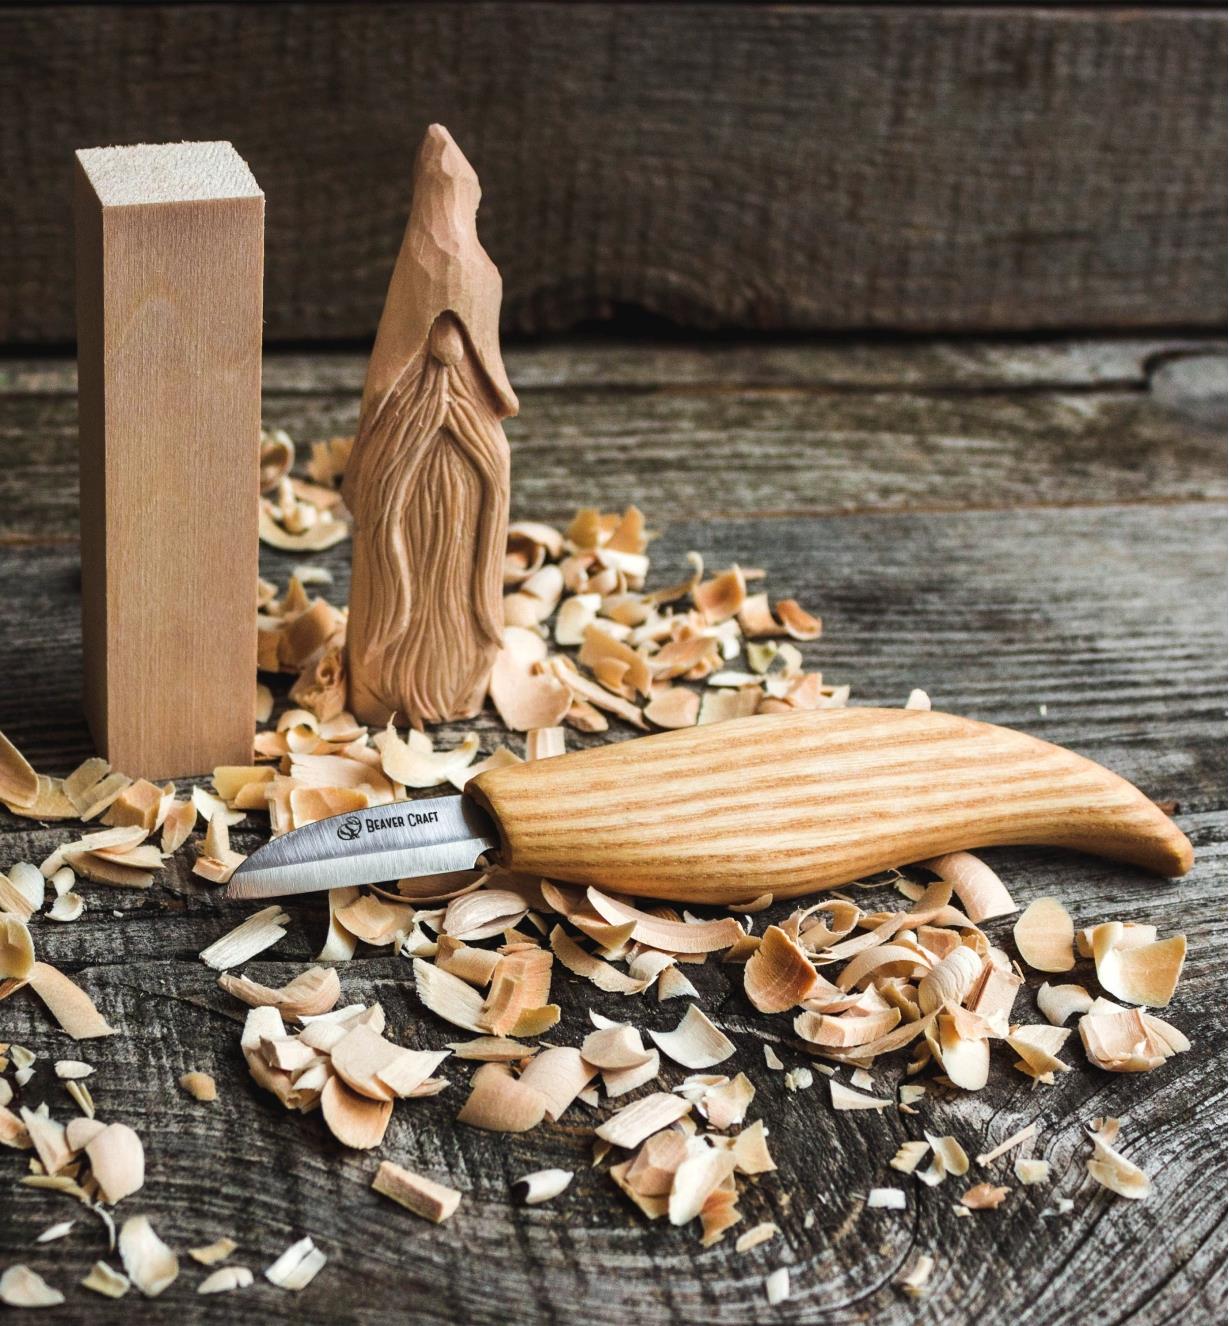 A wood blank, a finished wizard carving and a carving knife displayed on wood shavings